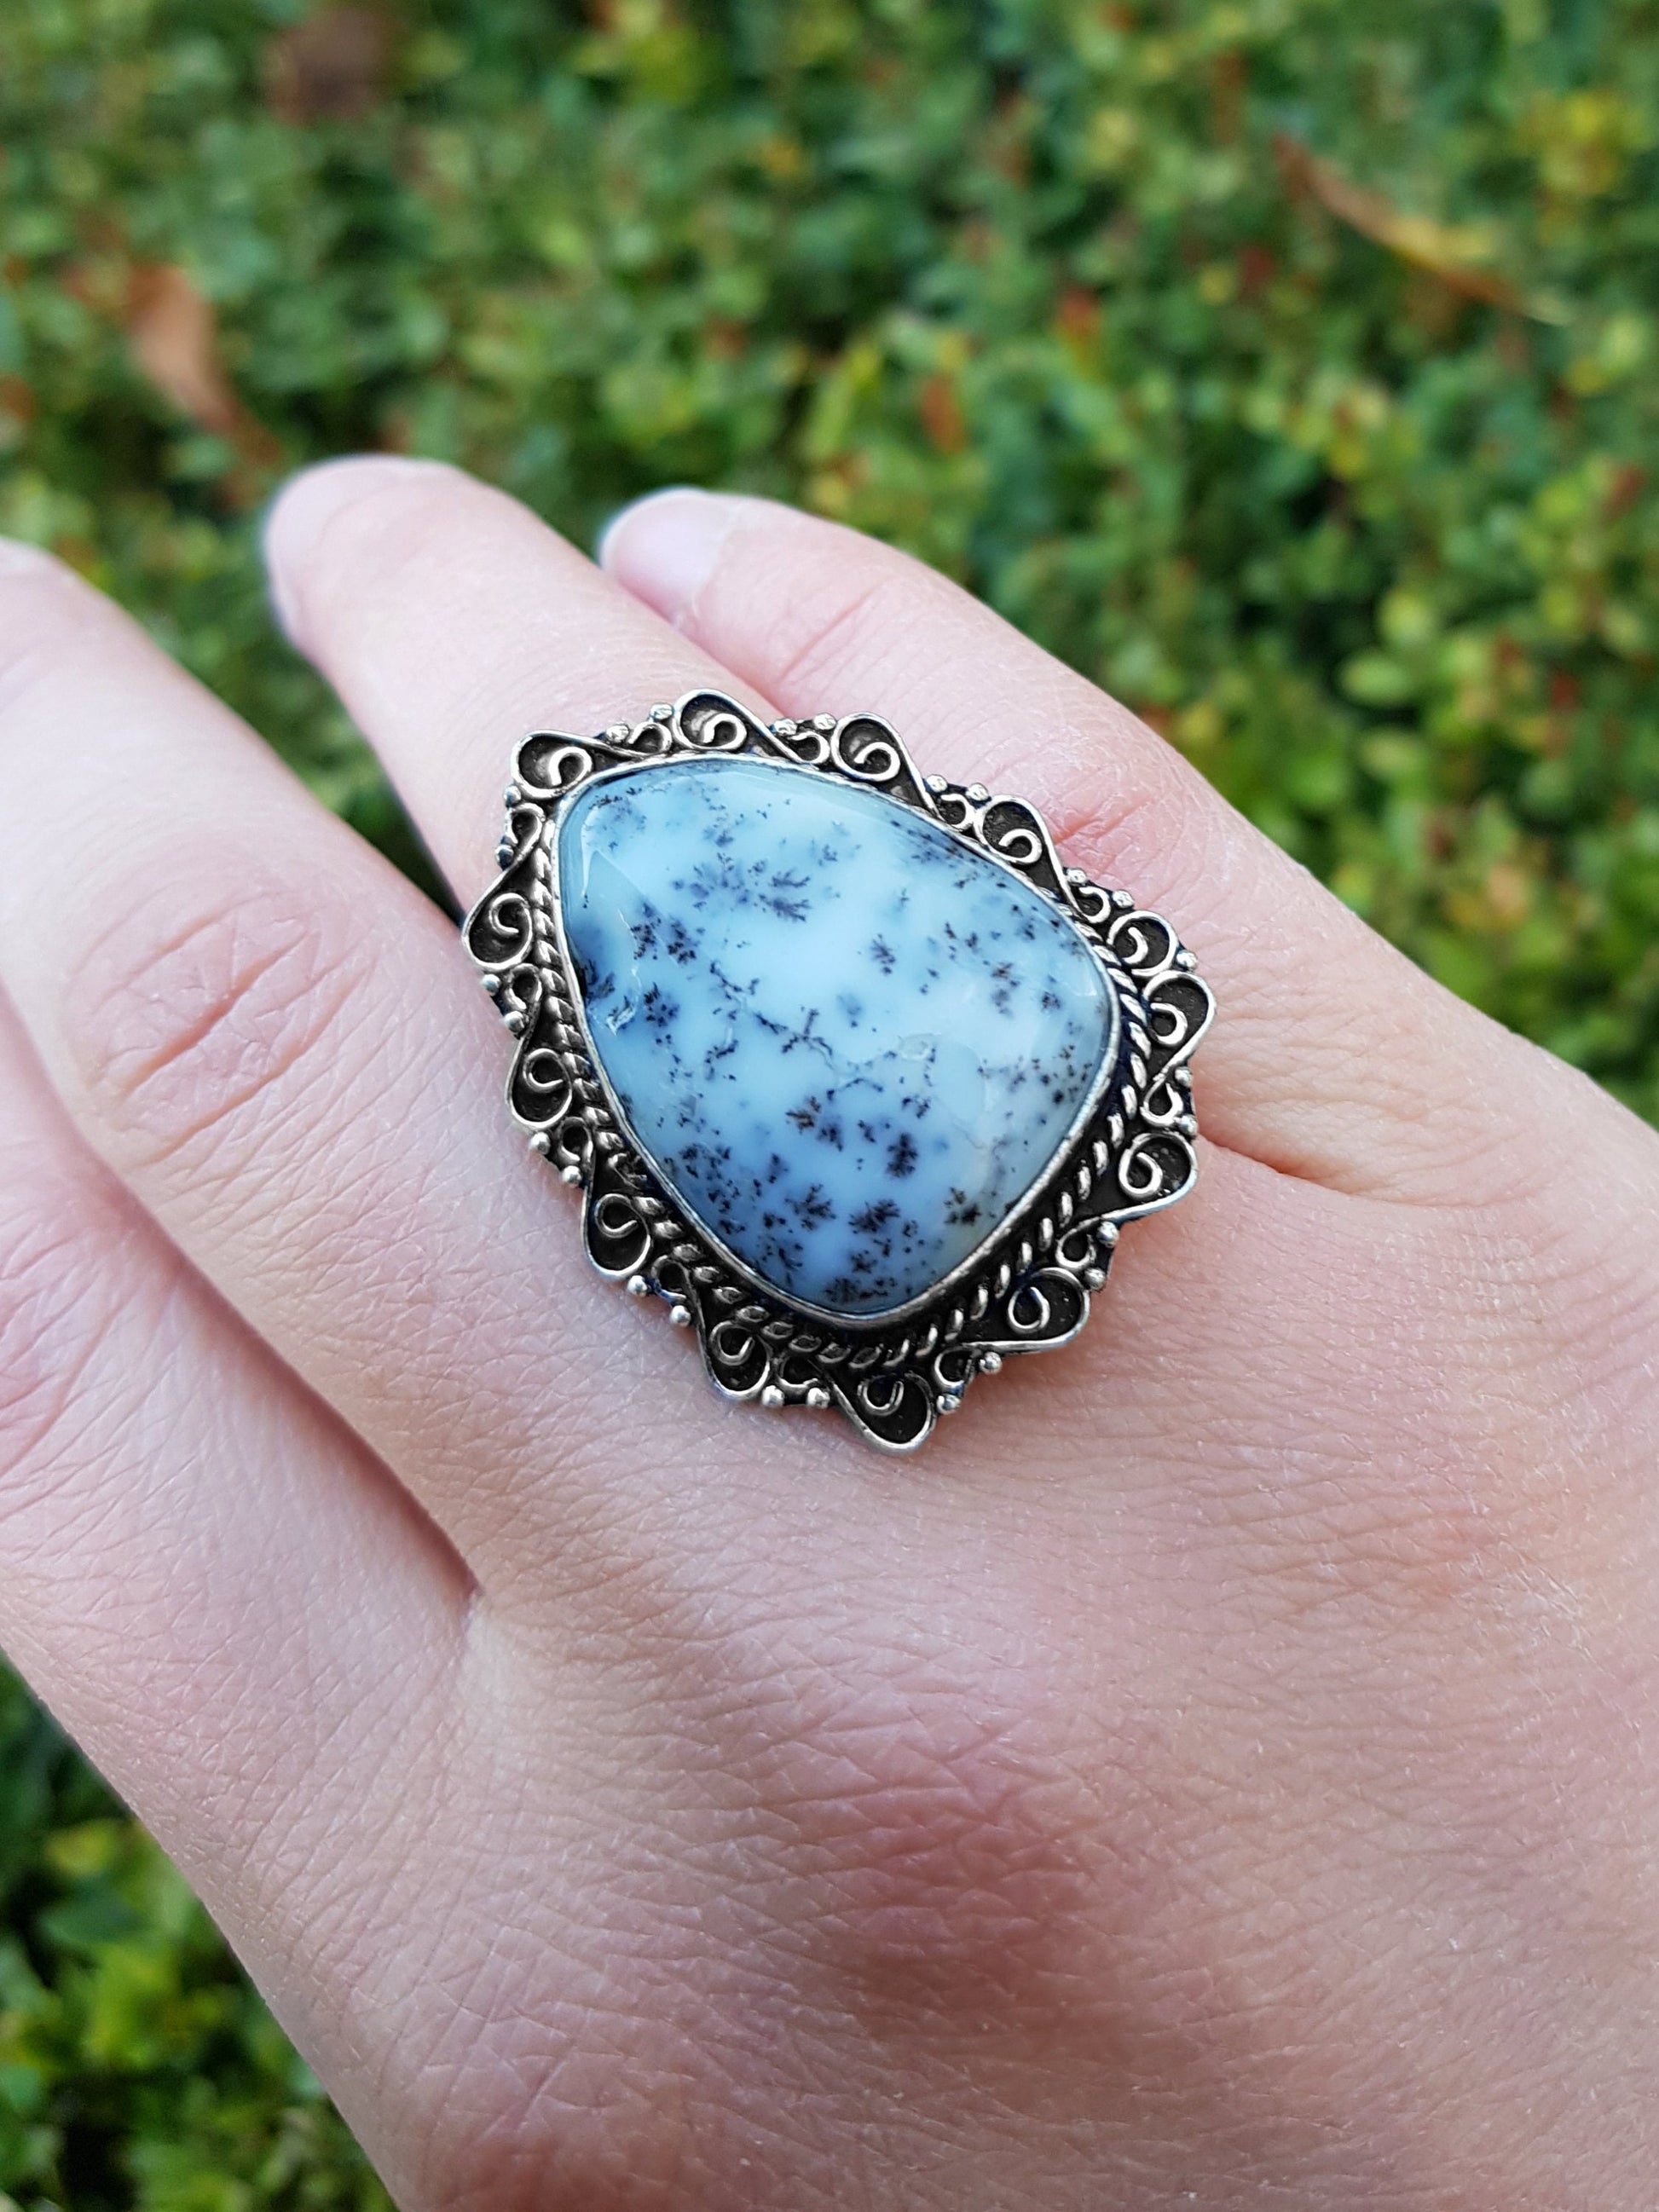 Dendrite Opal Gemstone Ring In Sterling Silver Size US 7 1/2 Statement Ring Boho Rings GypsyJewellery Unique Gift One Of A Kind Jewellery